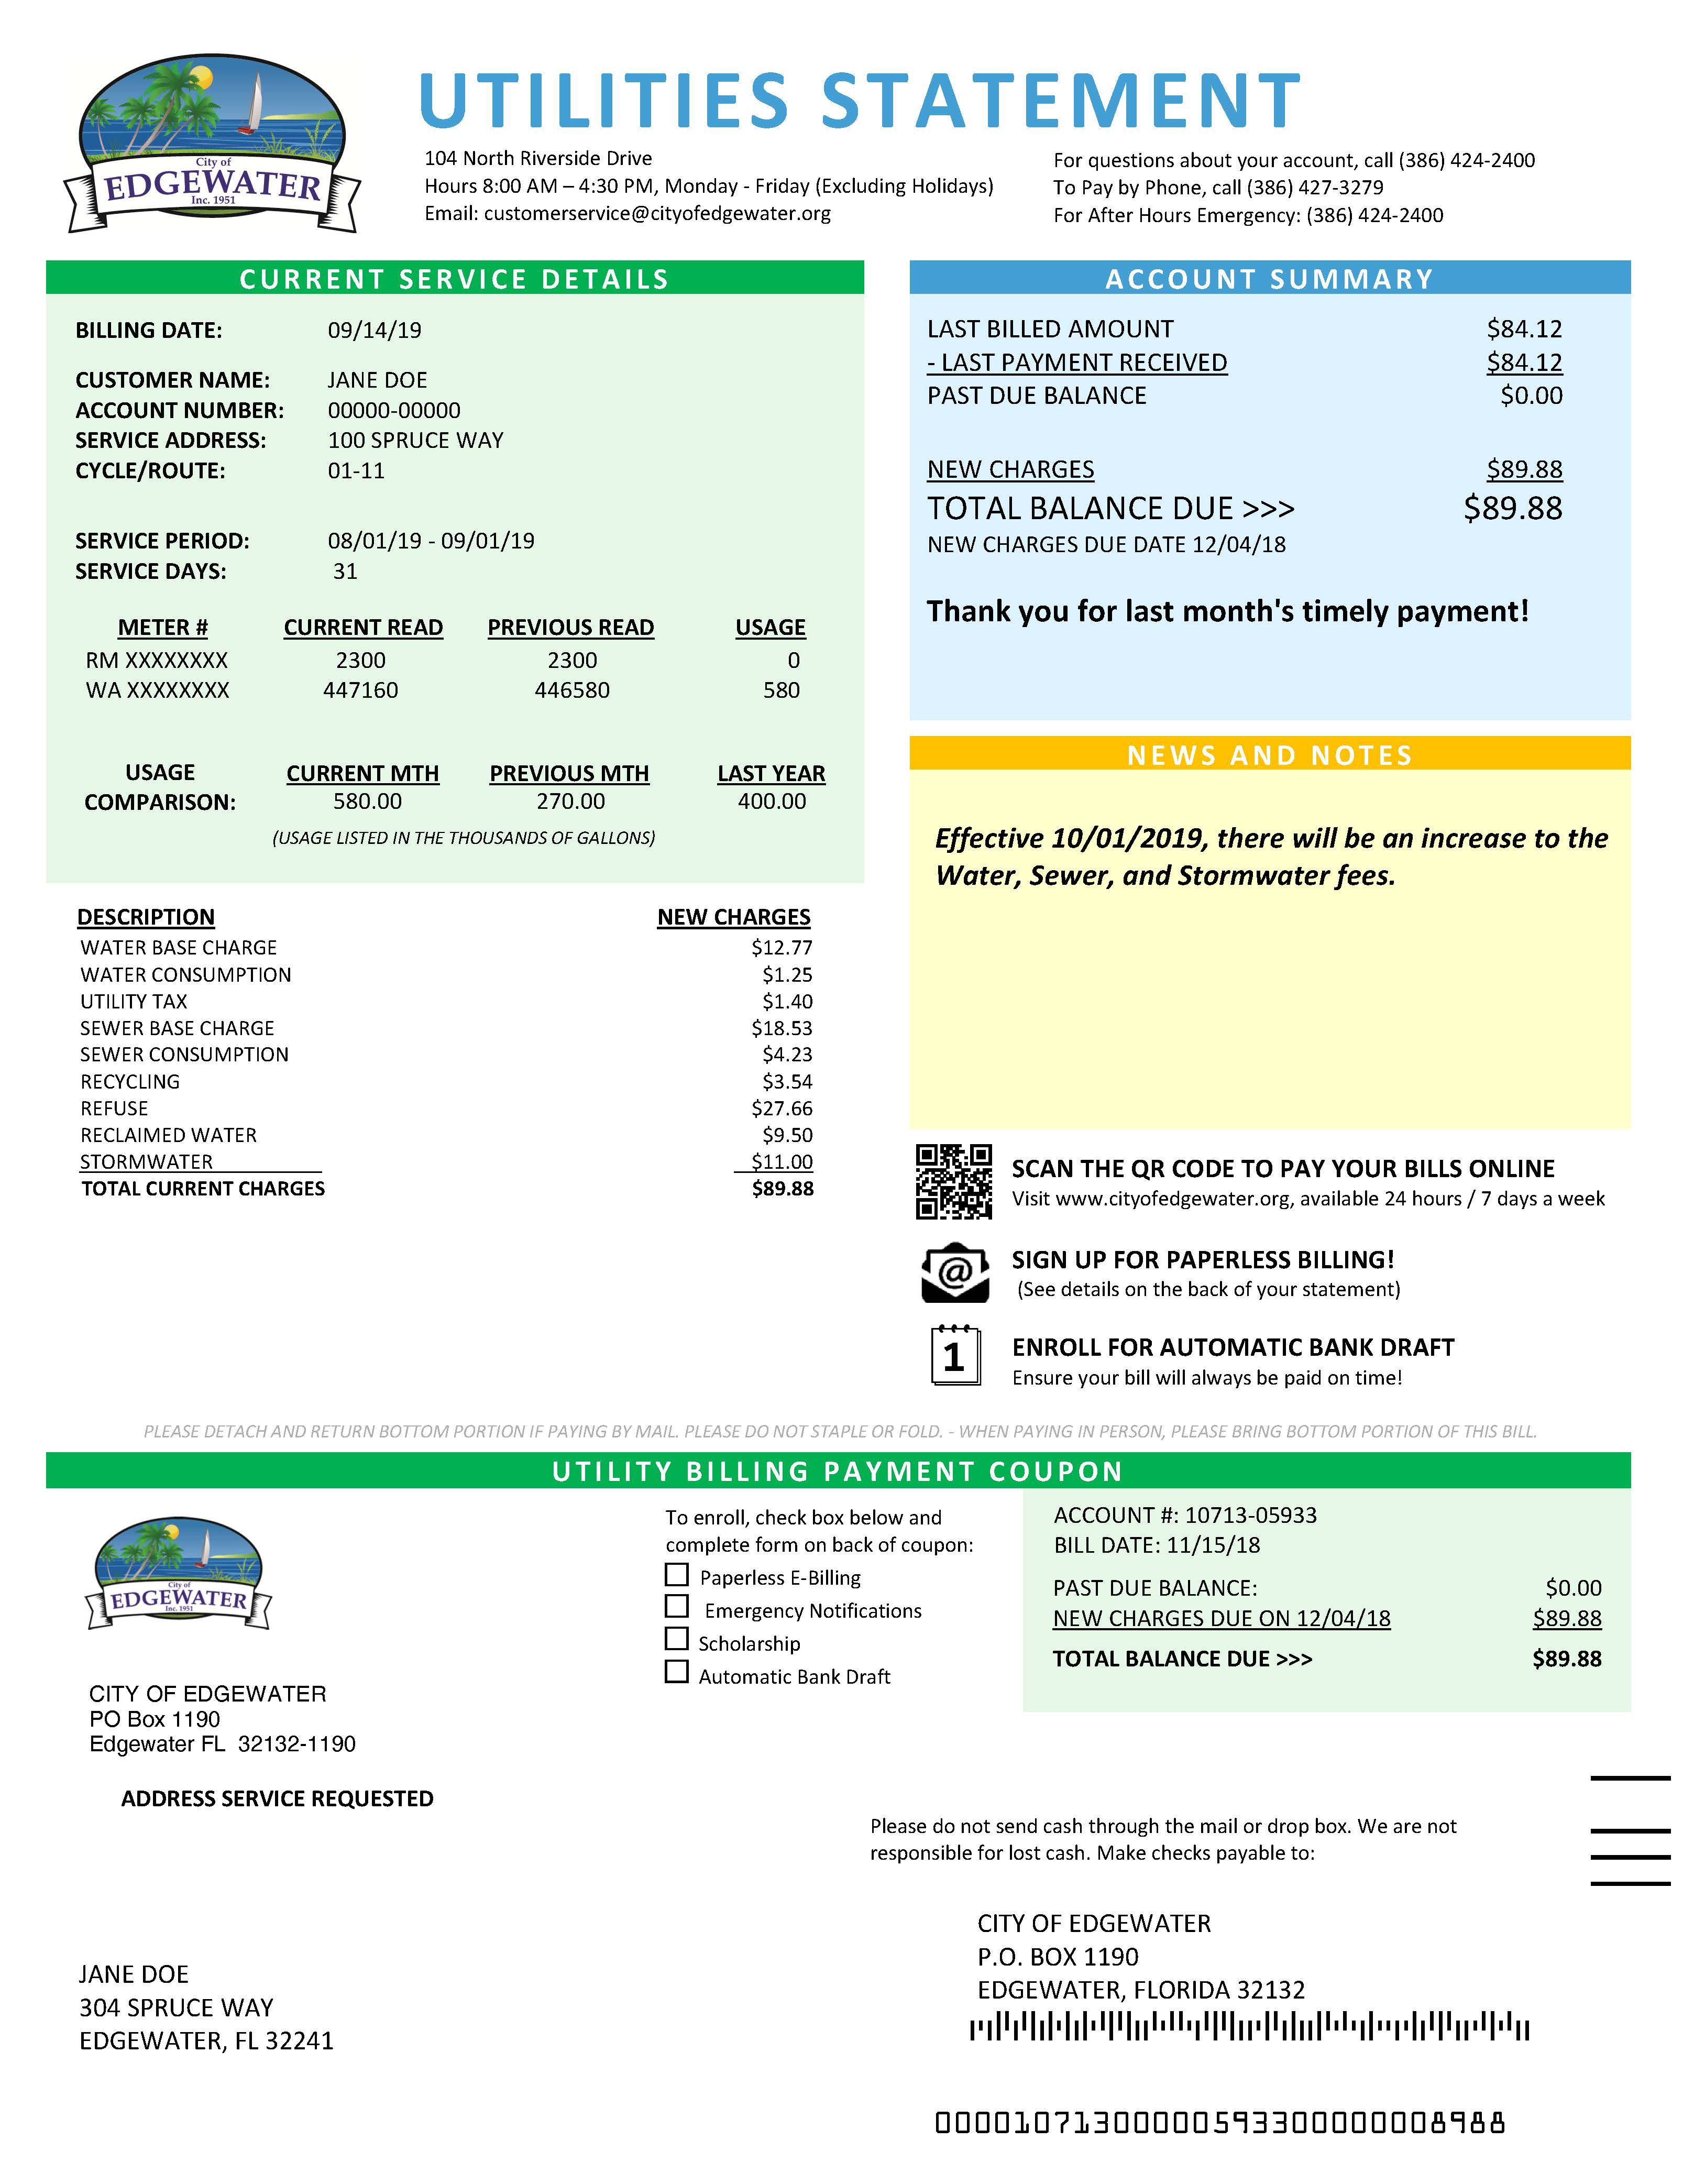 city-of-edgewater-monthly-utility-bill-city-of-edgewater-florida